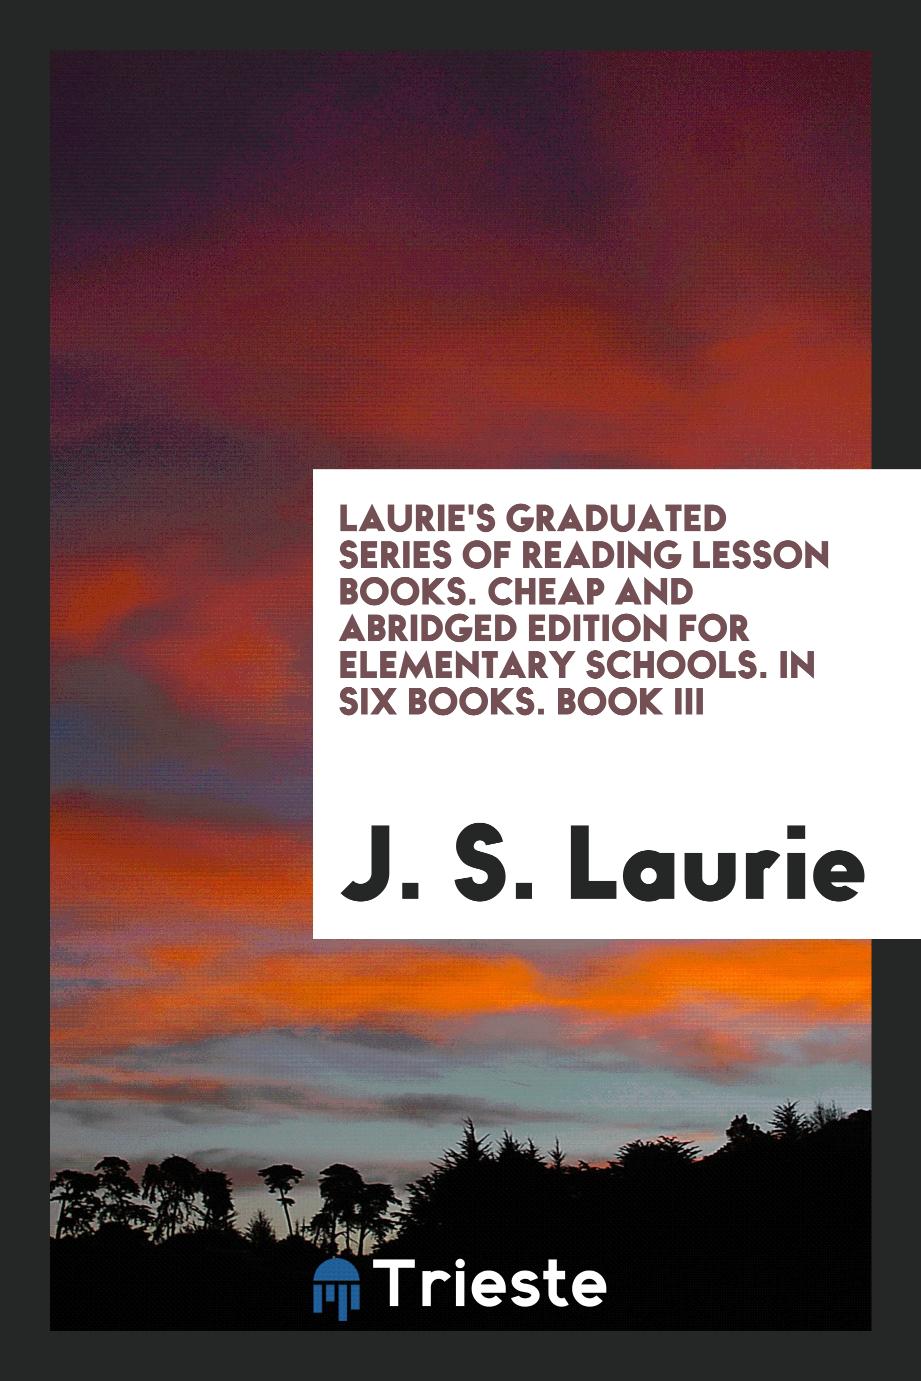 Laurie's Graduated Series of Reading Lesson Books. Cheap and Abridged Edition for Elementary Schools. In Six Books. Book III